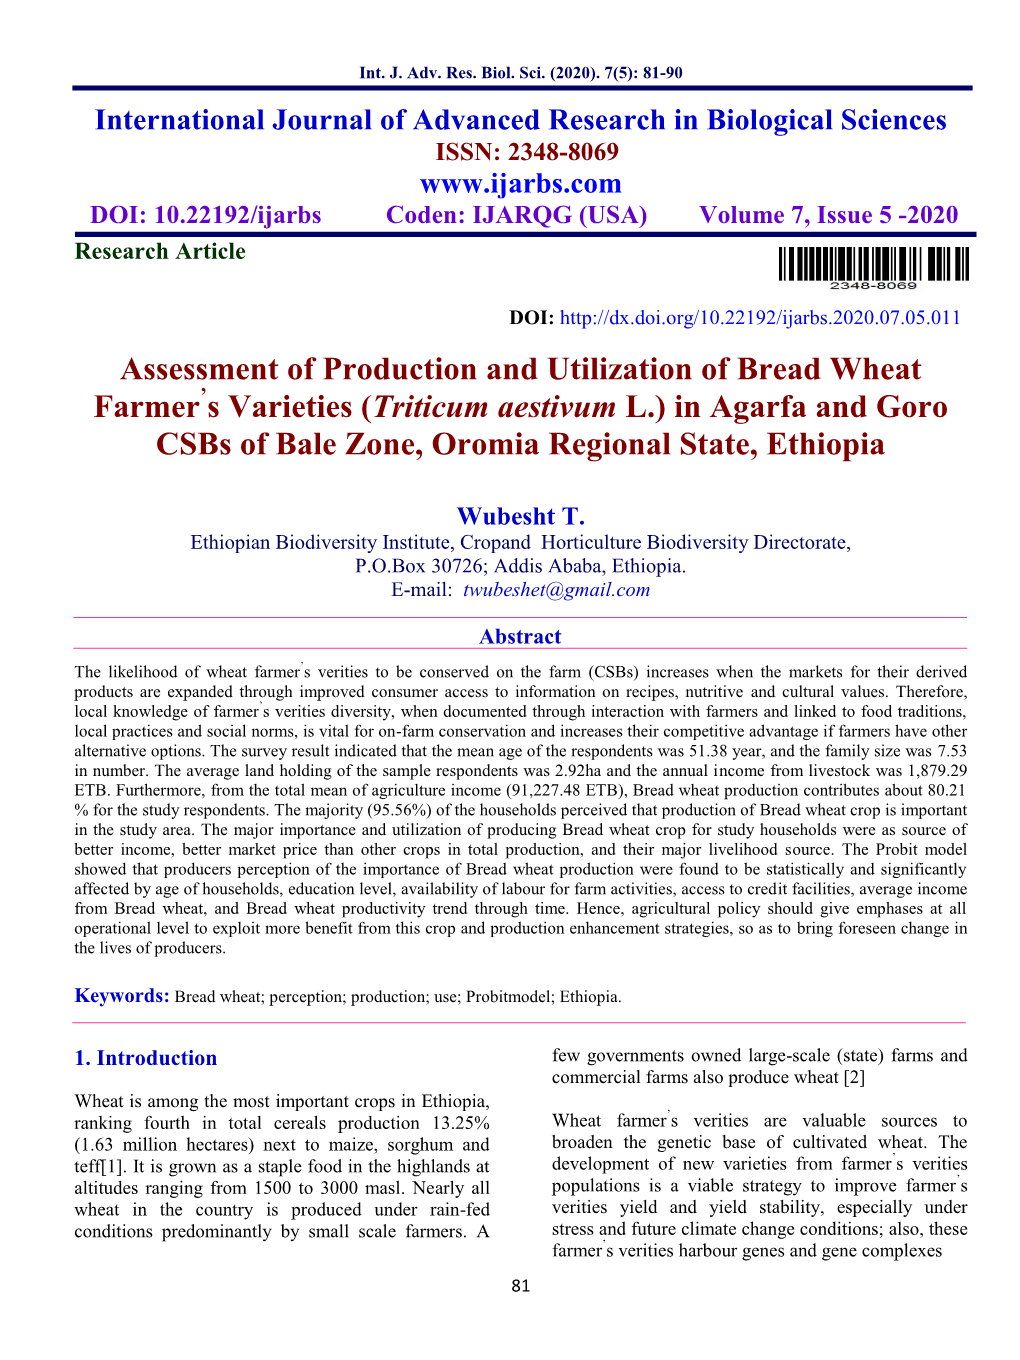 Assessment of Production and Utilization of Bread Wheat Farmer S Varieties (Triticum Aestivum L.) in Agarfa and Goro Csbs Of